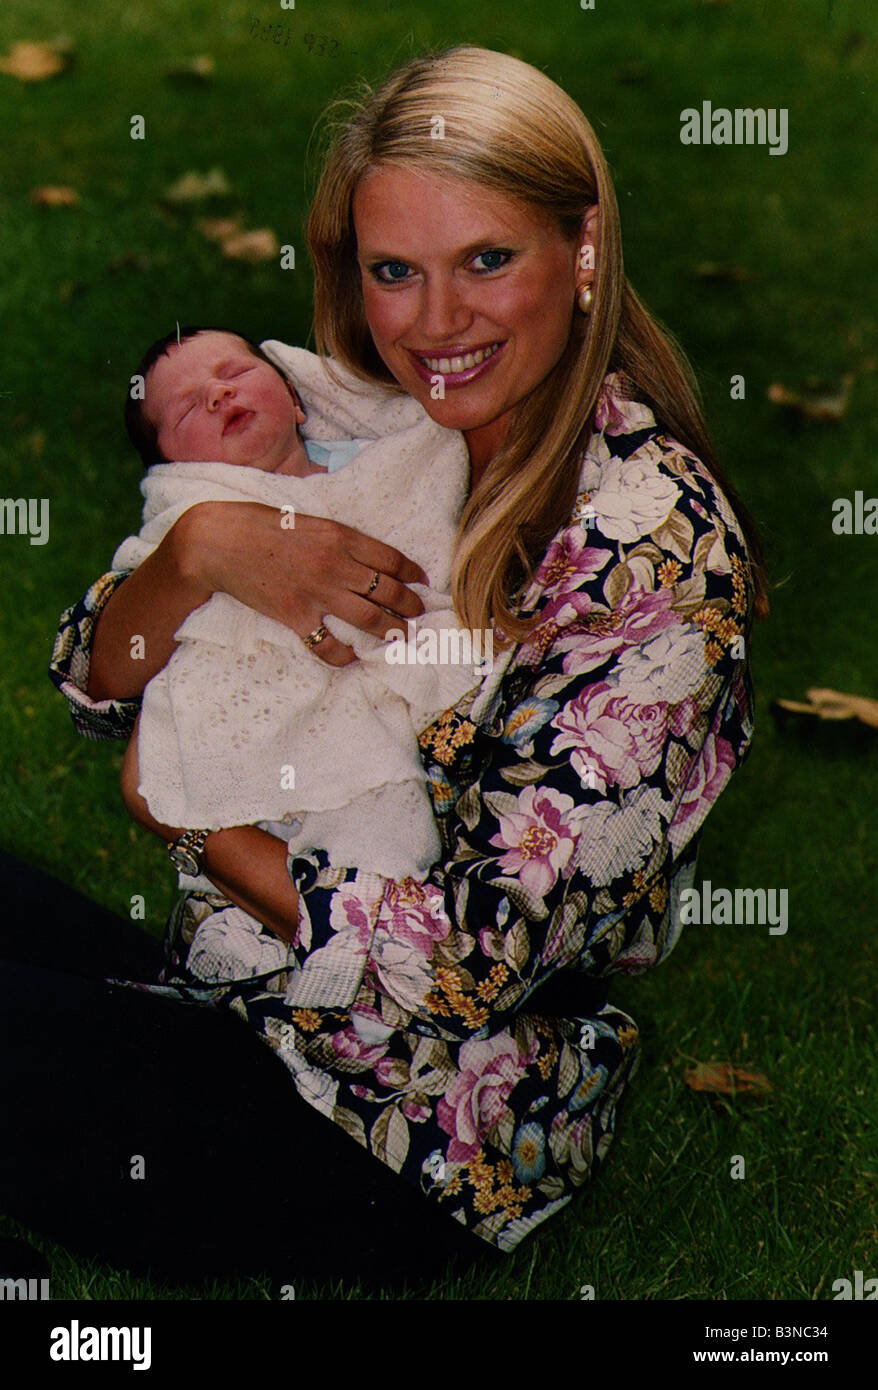 Anneka Rice holding baby smiling sitting on grass wearing flowery ...